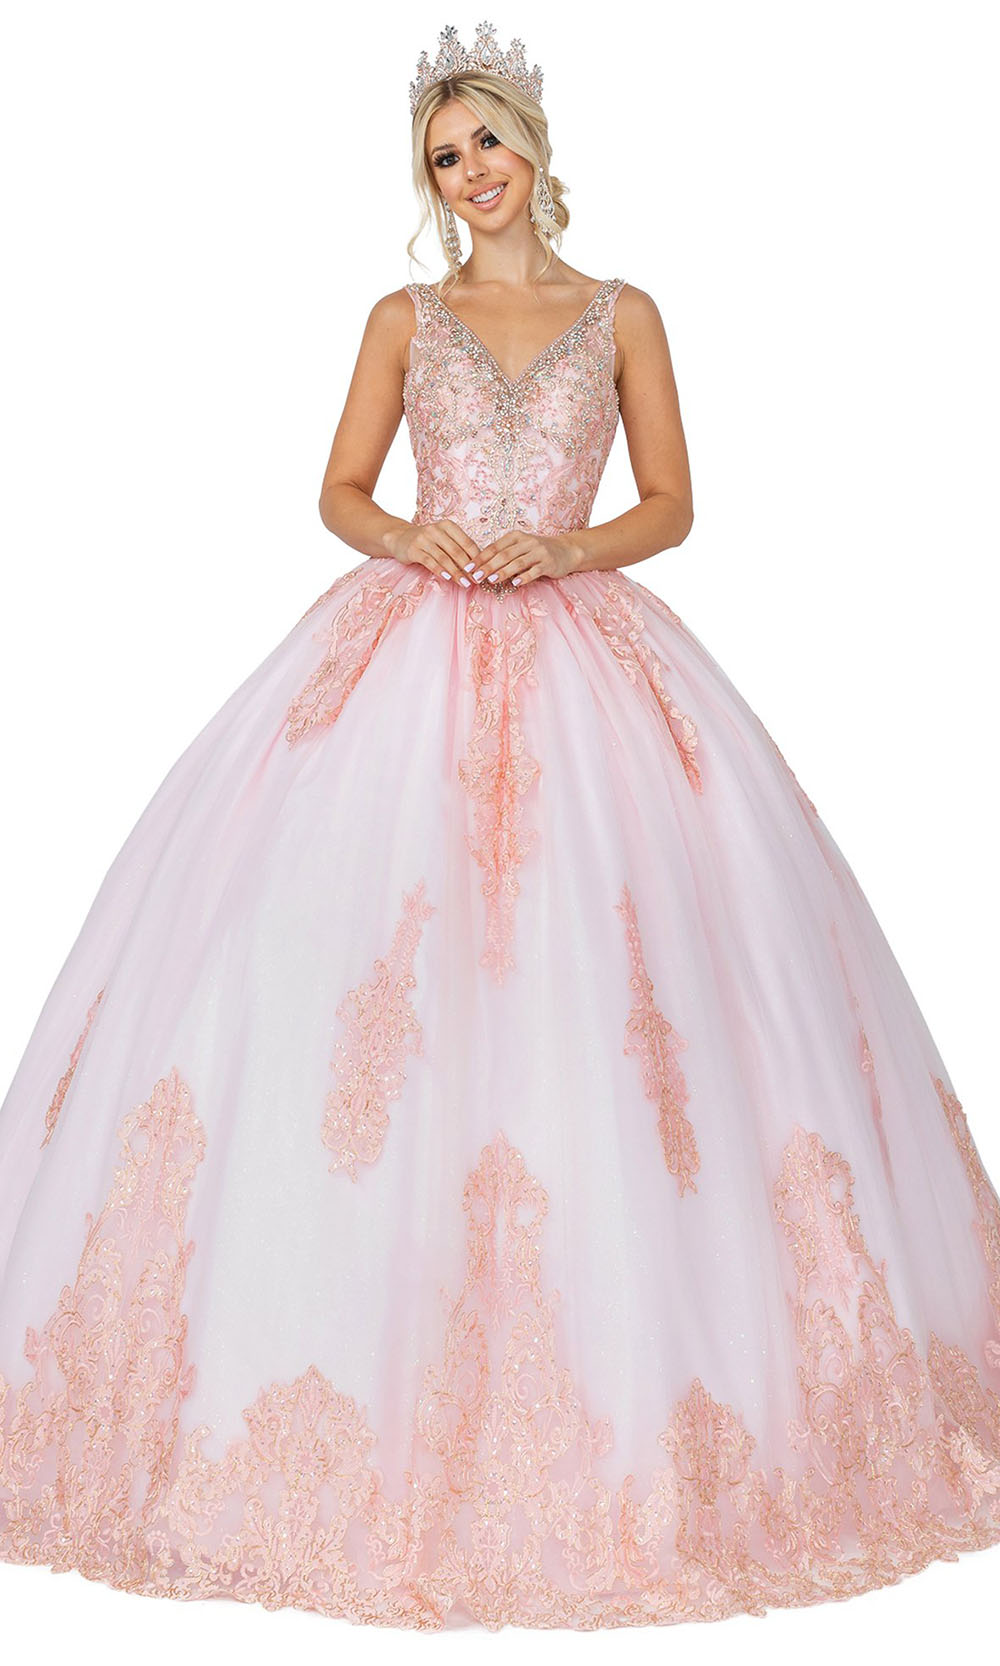 Dancing Queen - 1588 Sleeveless Embellished Ballgown In Pink